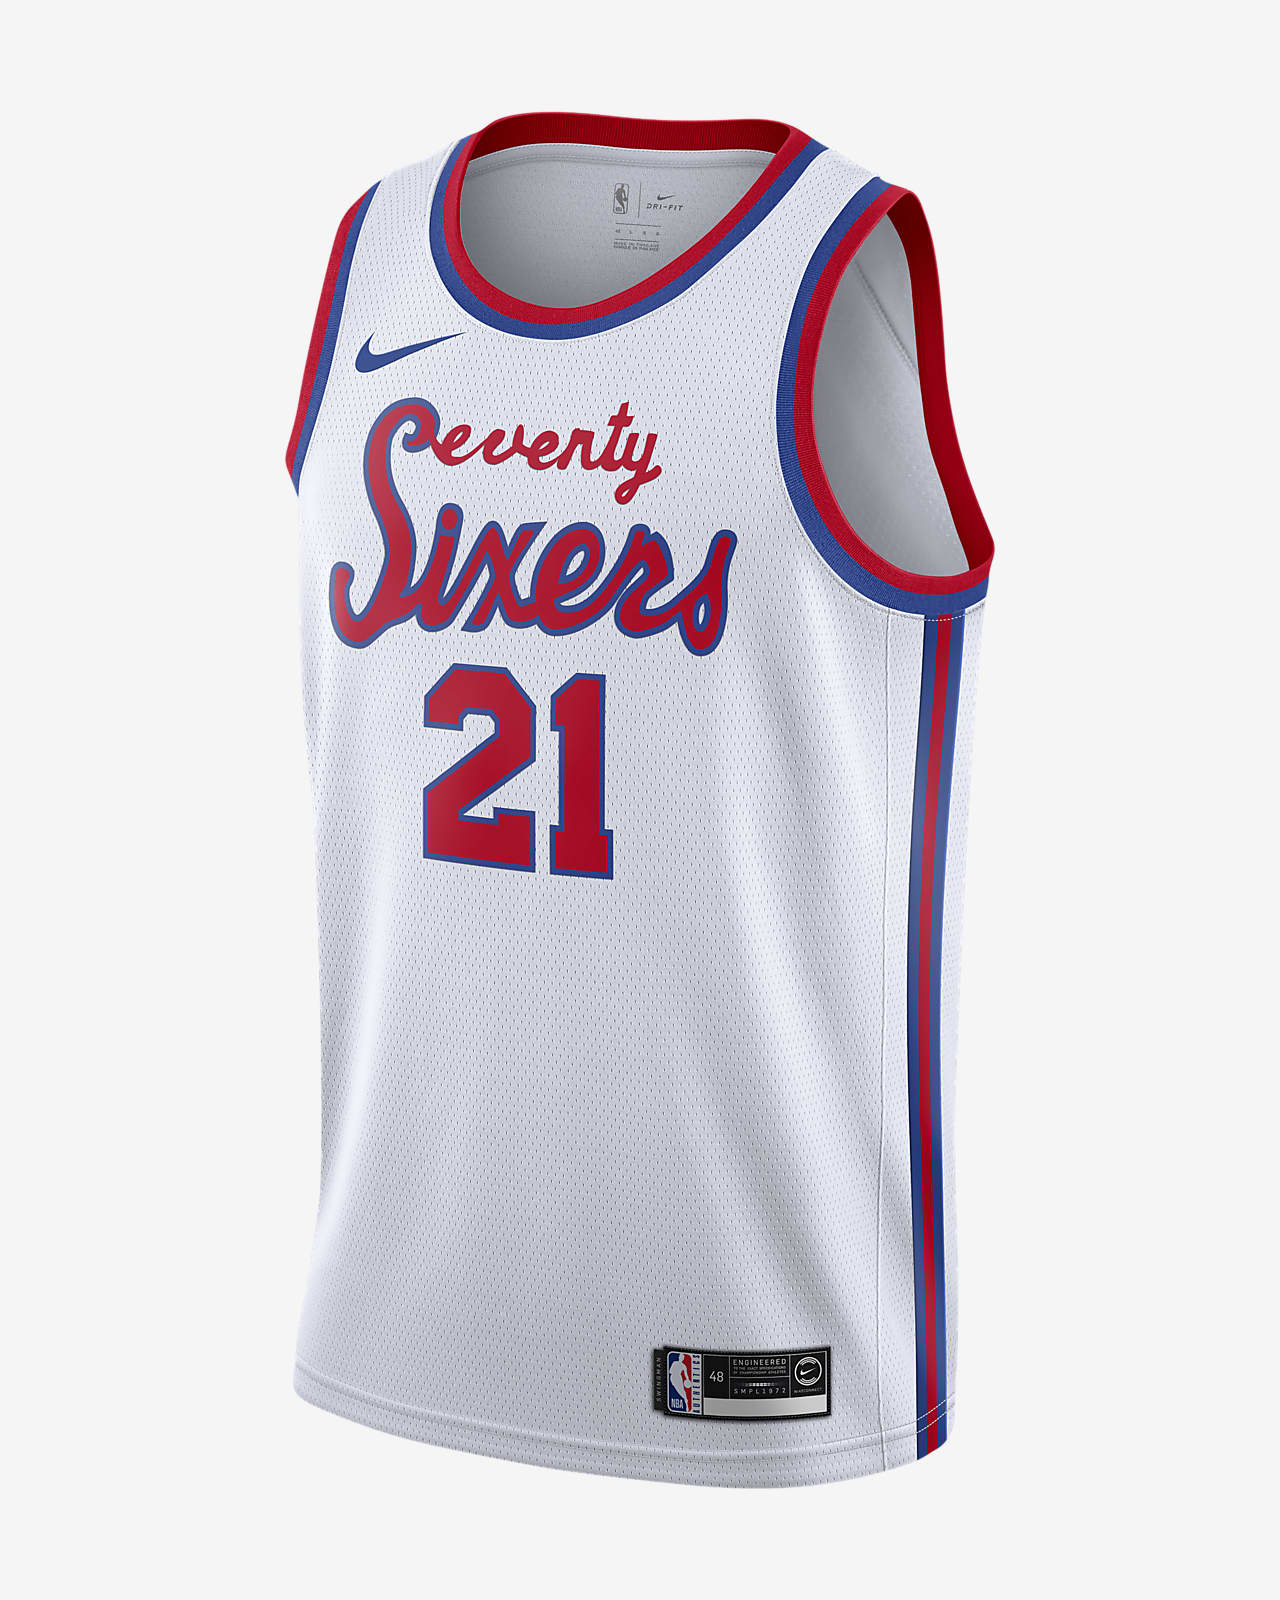 76ers new jersey